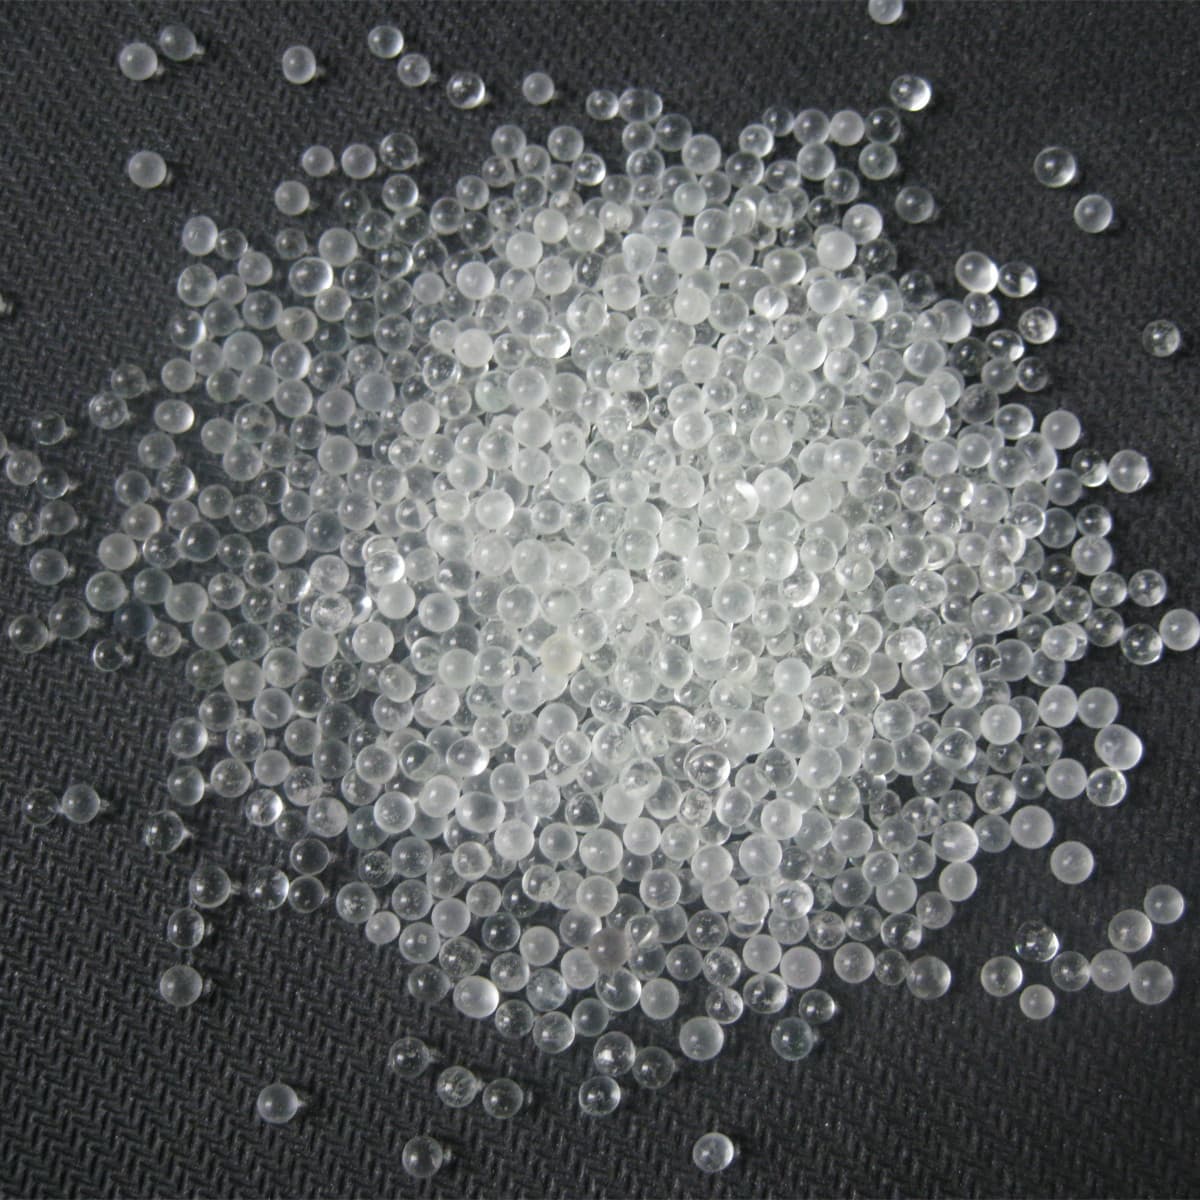 glass microballoon_Hollow Glass Microspheres for sale